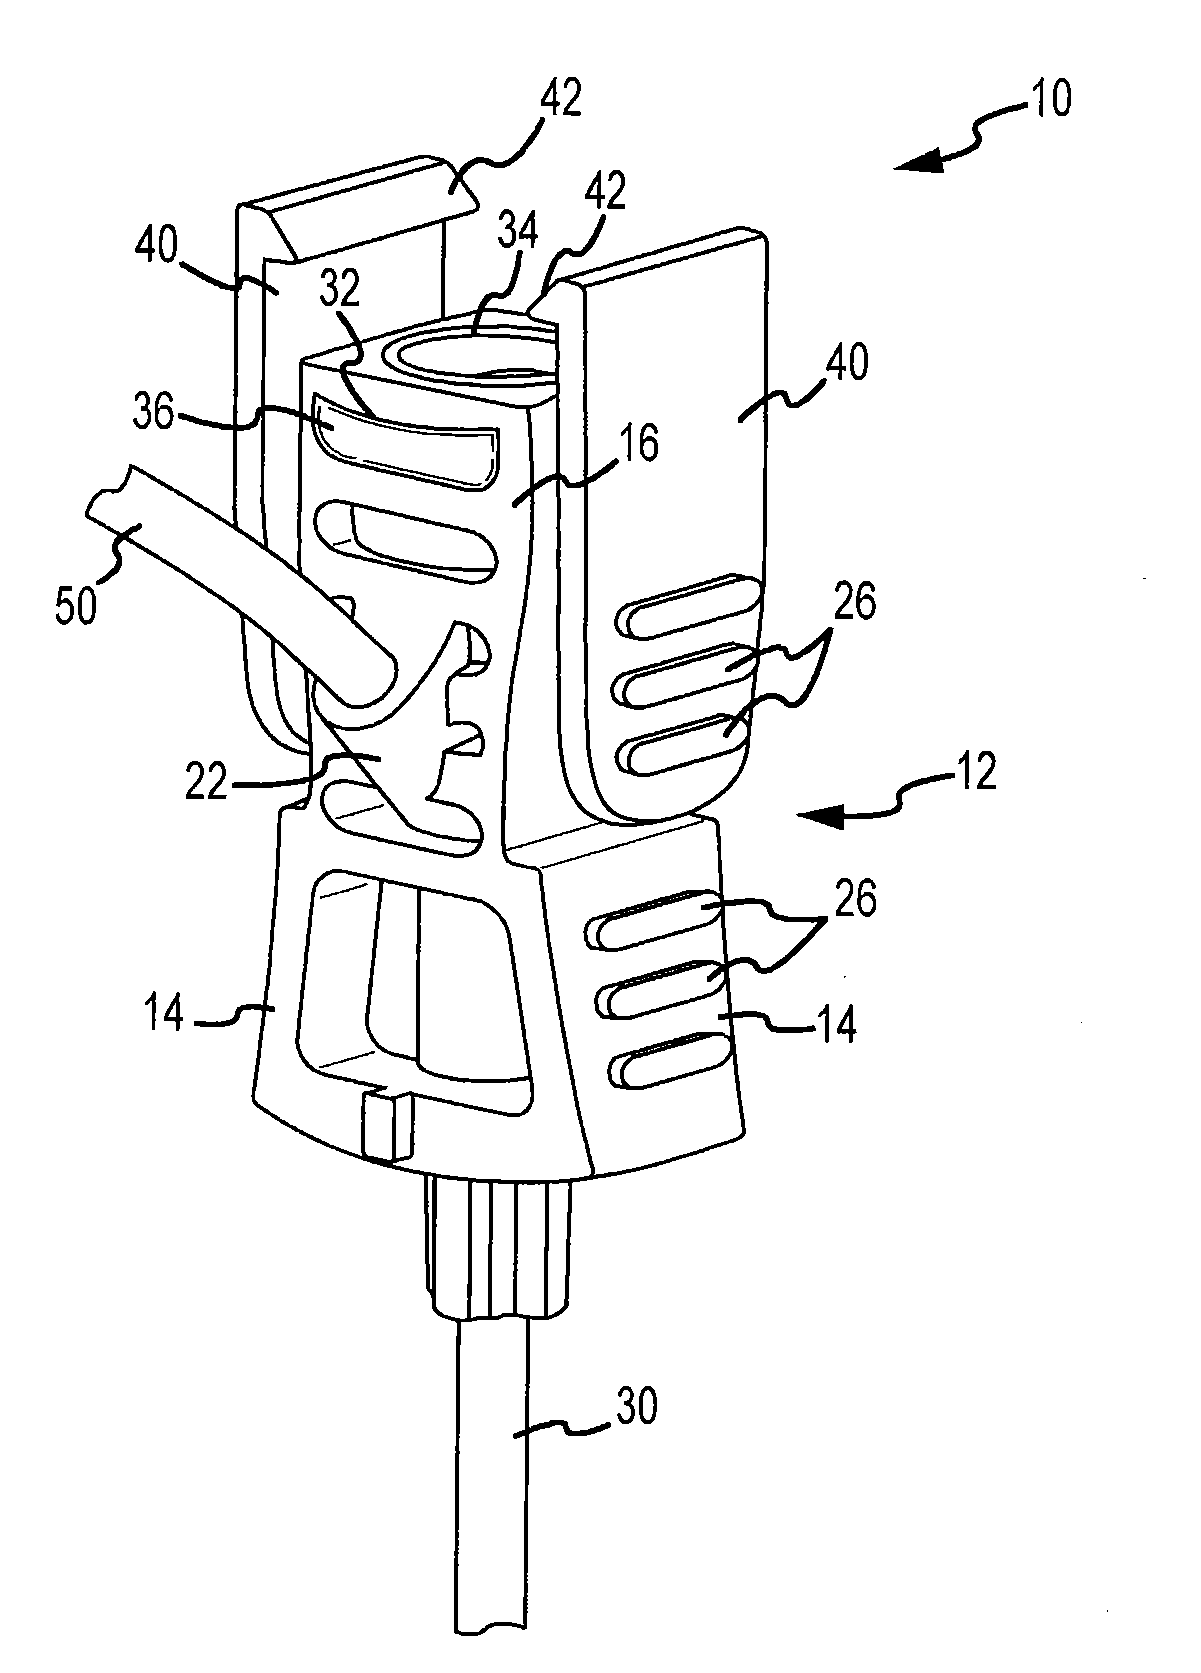 Electrical stimulation and infusion introducer assembly